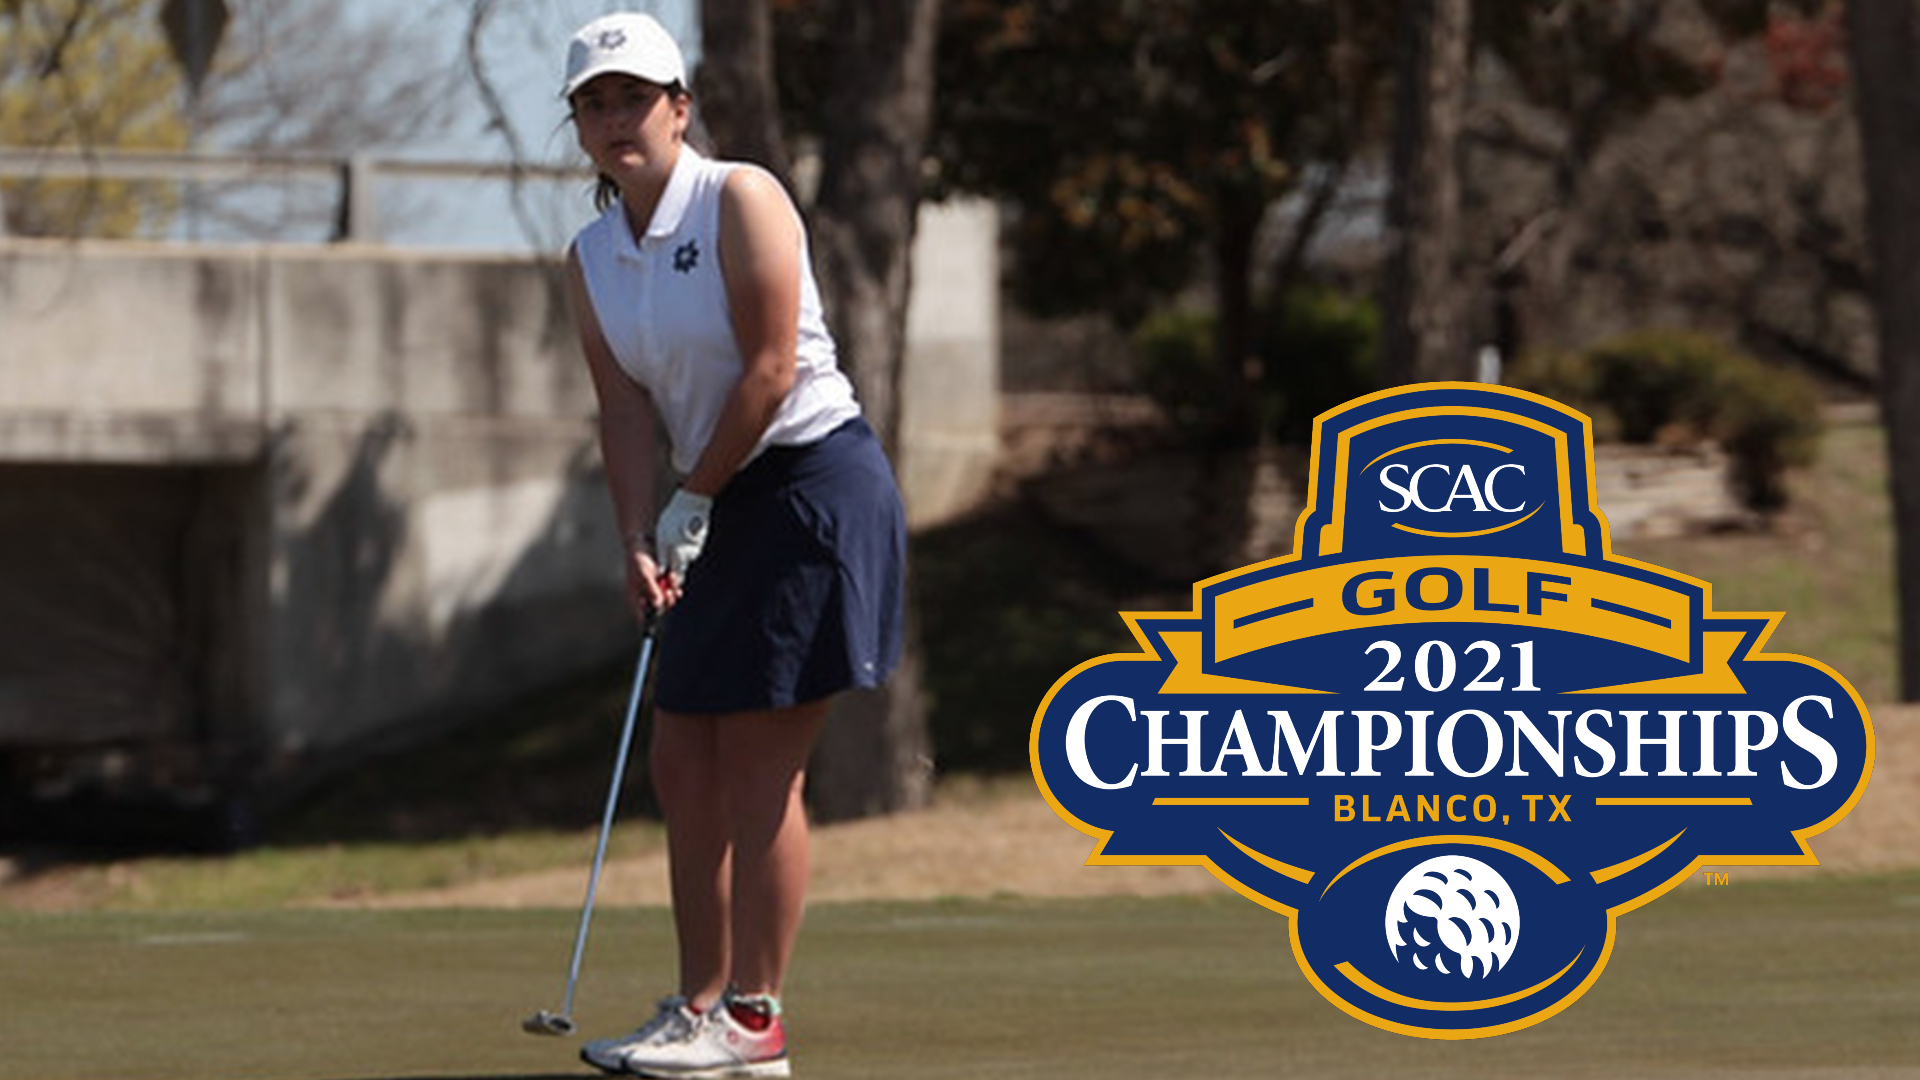 UD Women's Golf Competing in 1st SCAC Championship; Preview